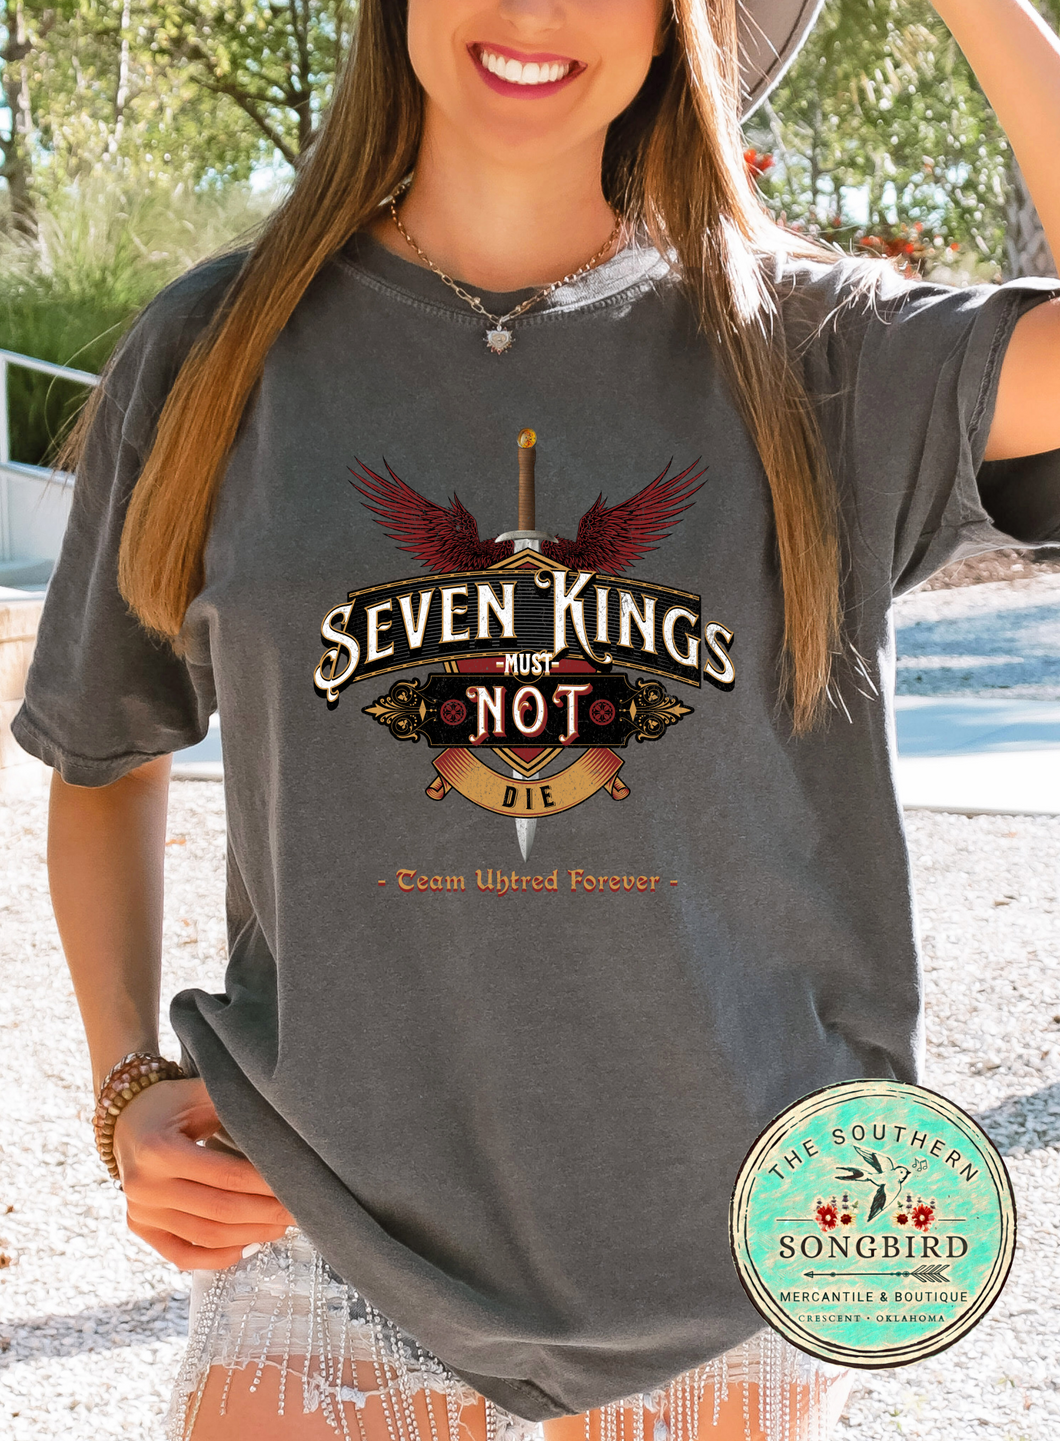 SALE!! Ready To Ship!! Seven Kings Must NOT Die Graphic T-shirt